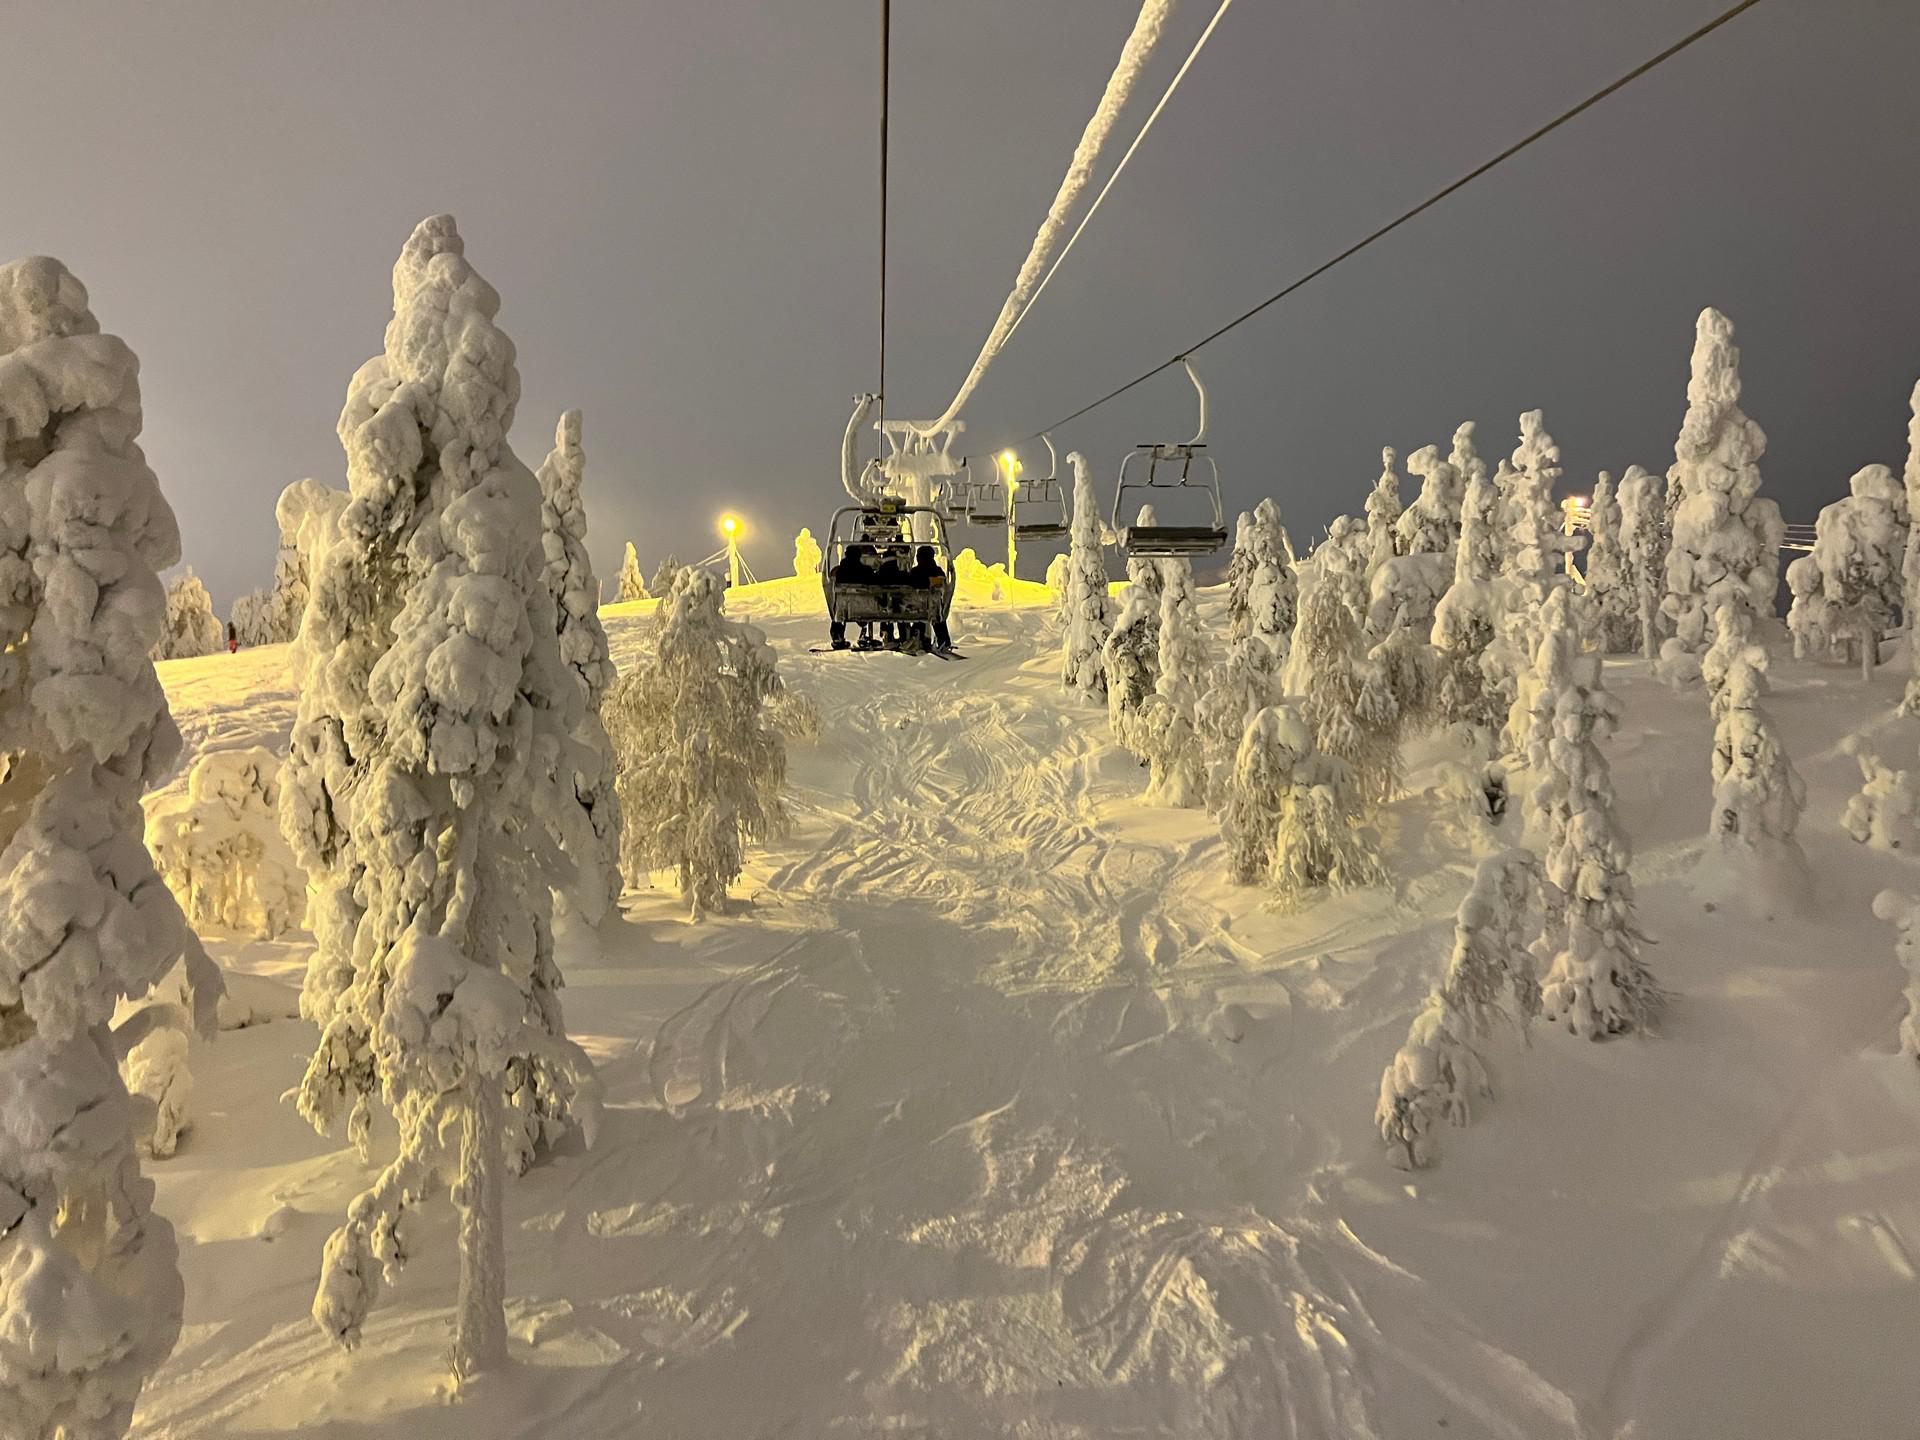 Riding the ski lift over snow covered trees in Ruka, Finland. The Lapland Series reflection post